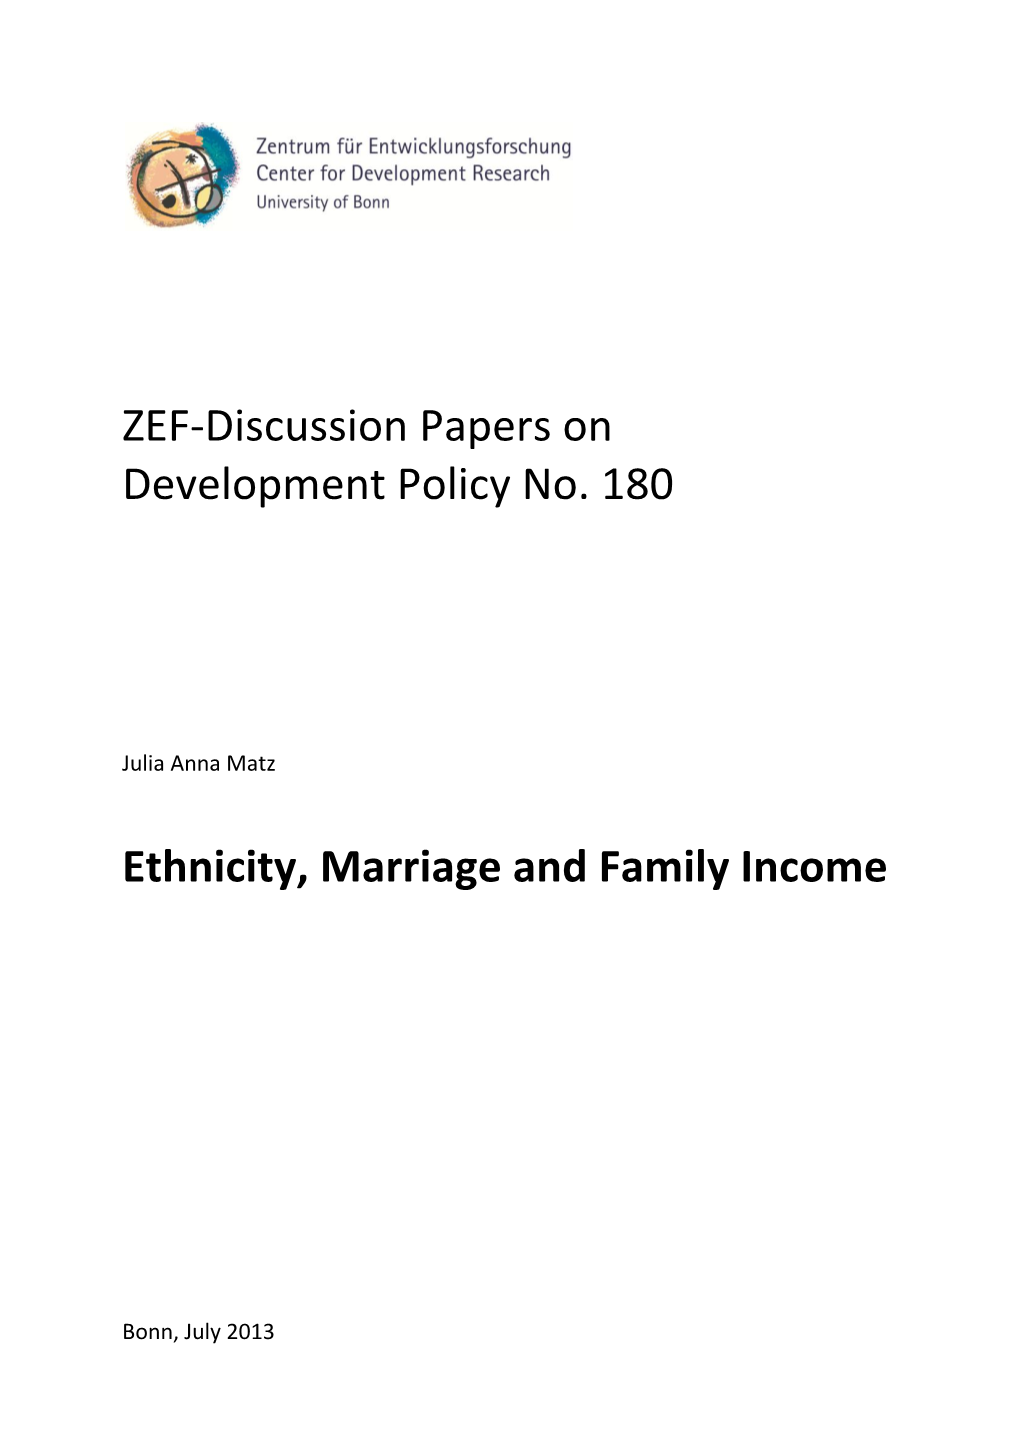 Ethnicity, Marriage and Family Income